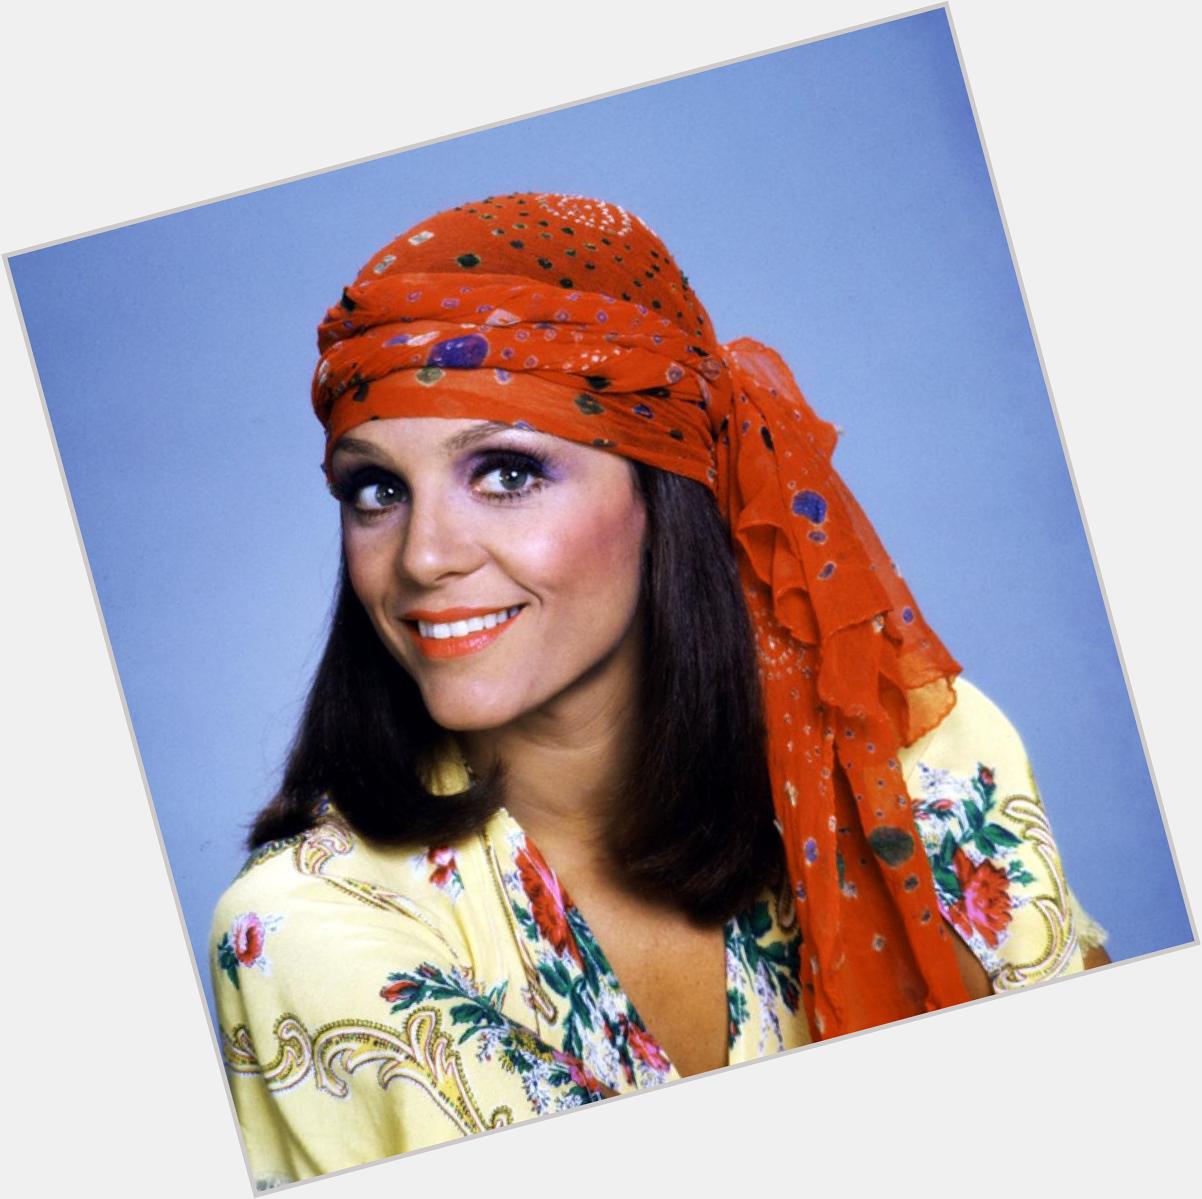 Happy Birthday to Valerie Harper, who turns 76 today! 